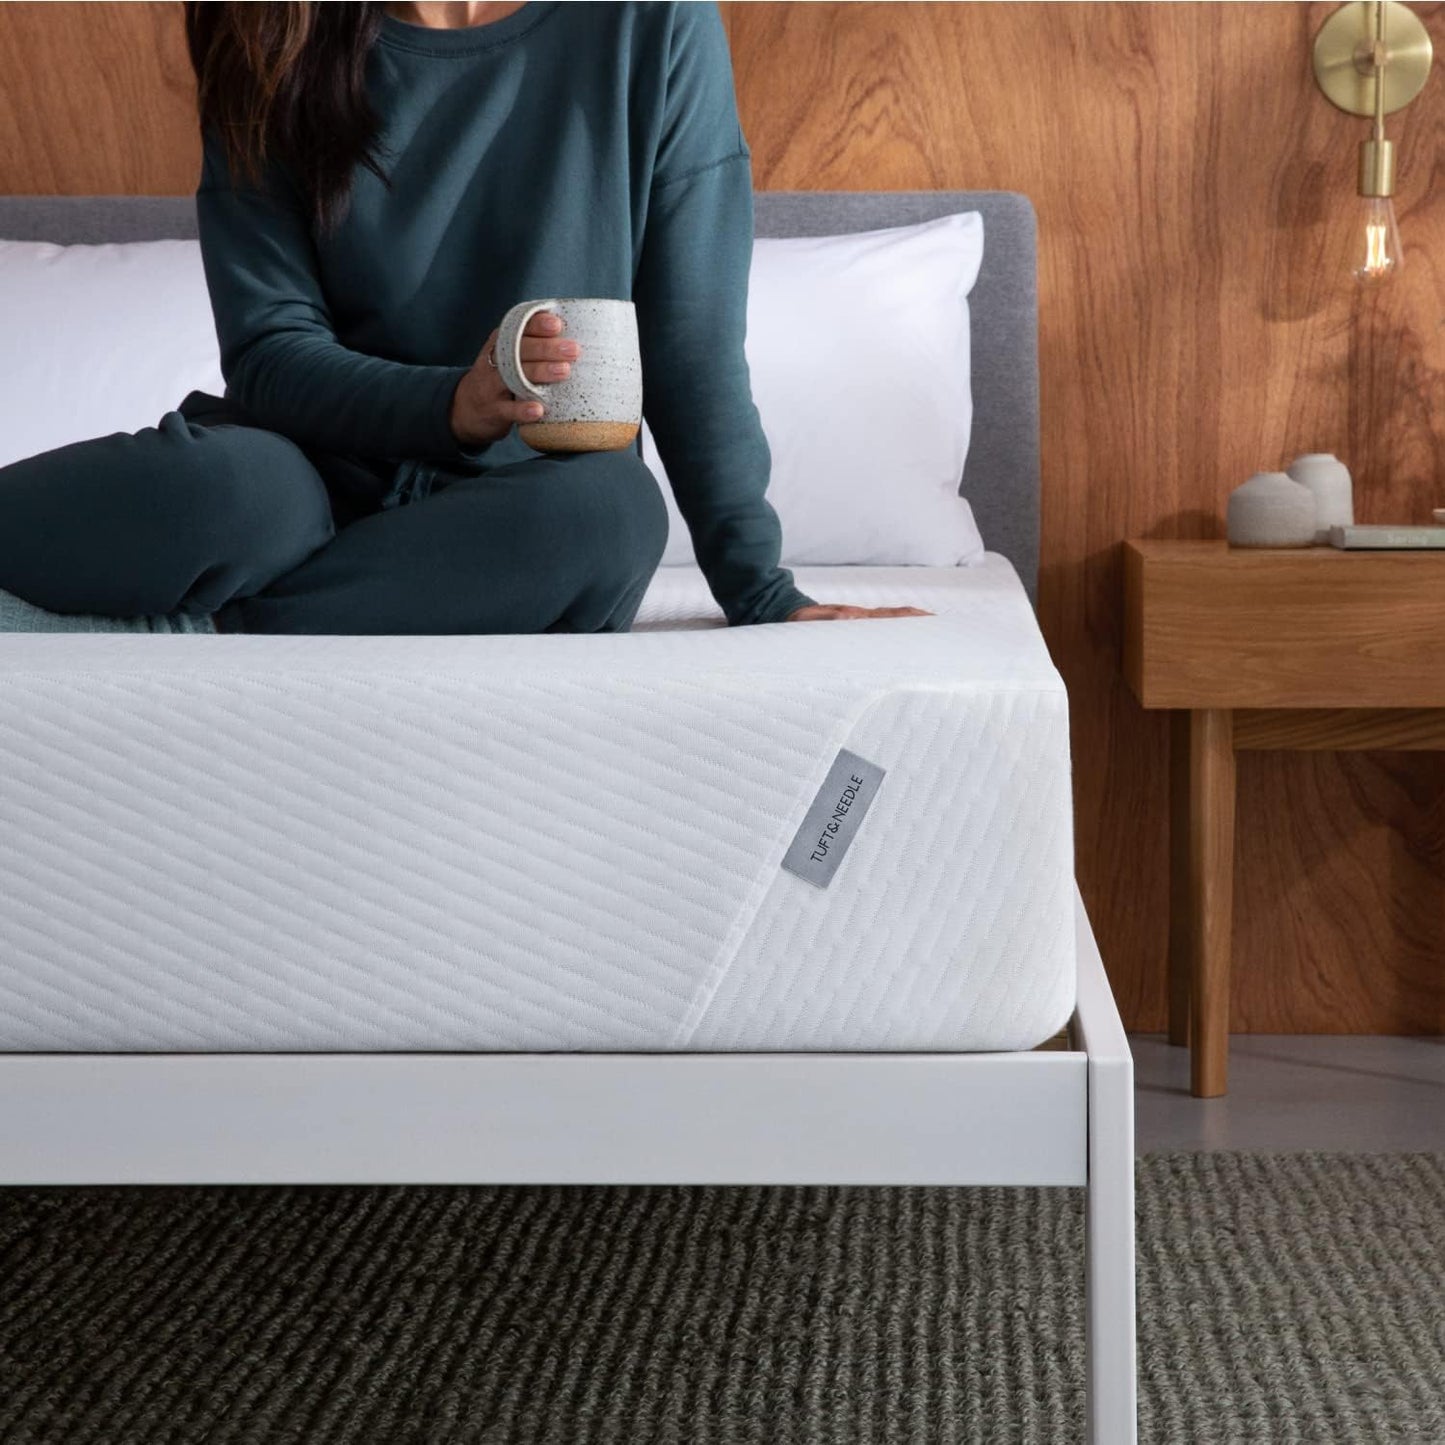 NEW - TUFT & NEEDLE FULL - Original Limited Mattress With T&N Adaptive Foam Technology - CertiPUR-US - 100 Night Trial - Retail $845